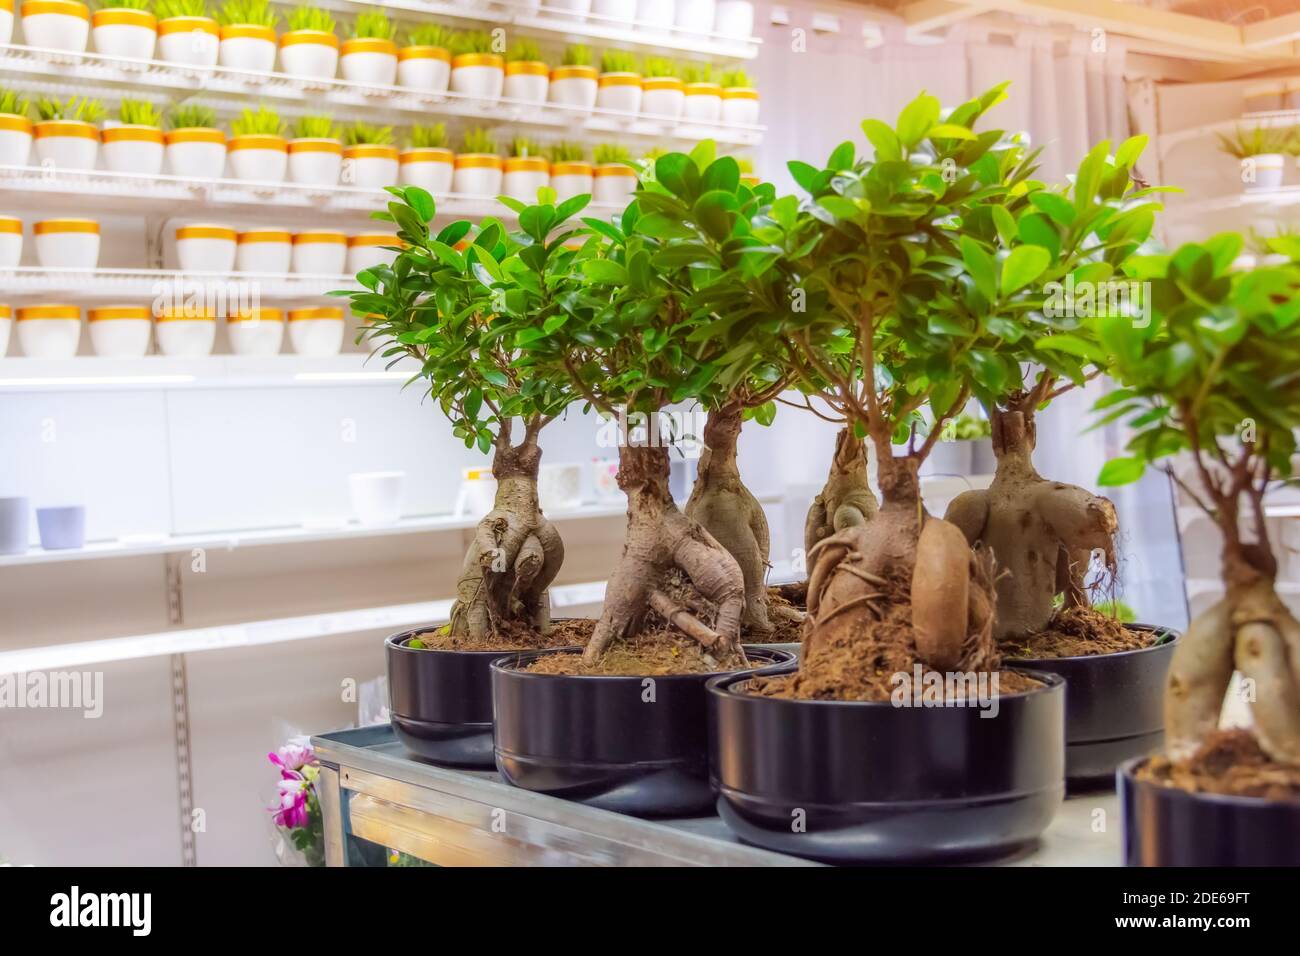 Ficus microcarpa on store shelves, sale of indoor plants Stock Photo